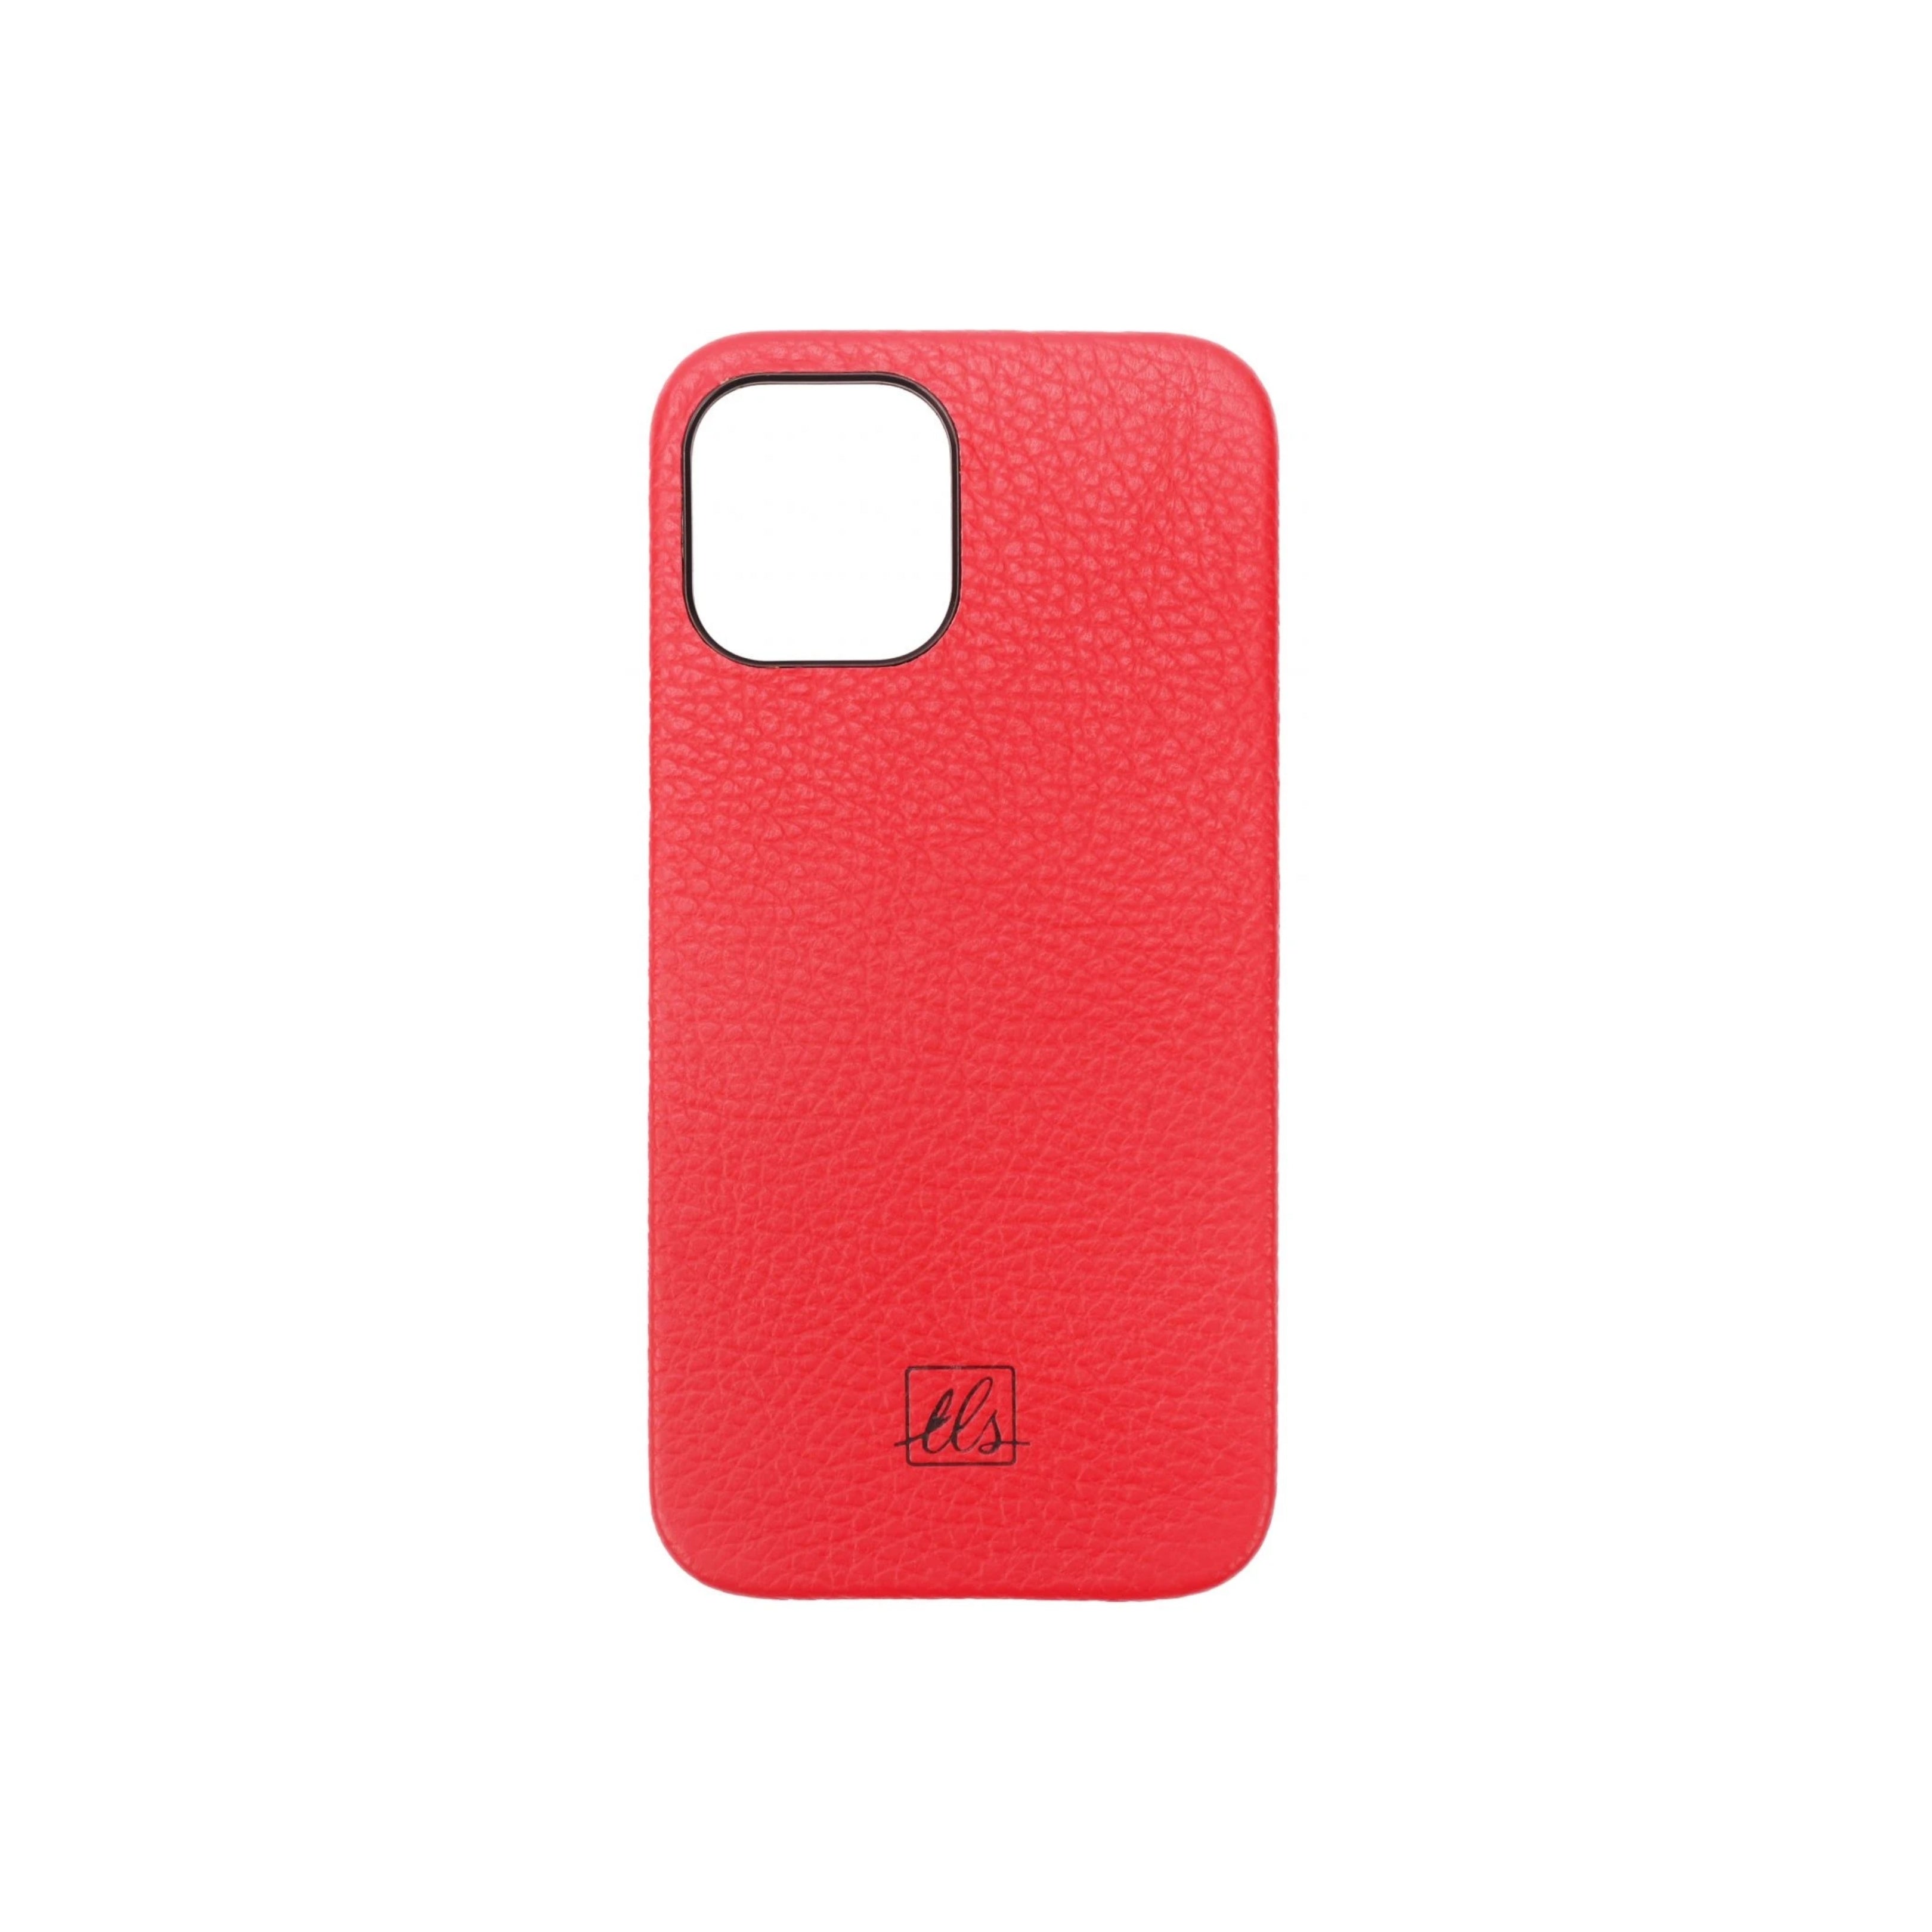 iPhone 12 Pro Leather Cover